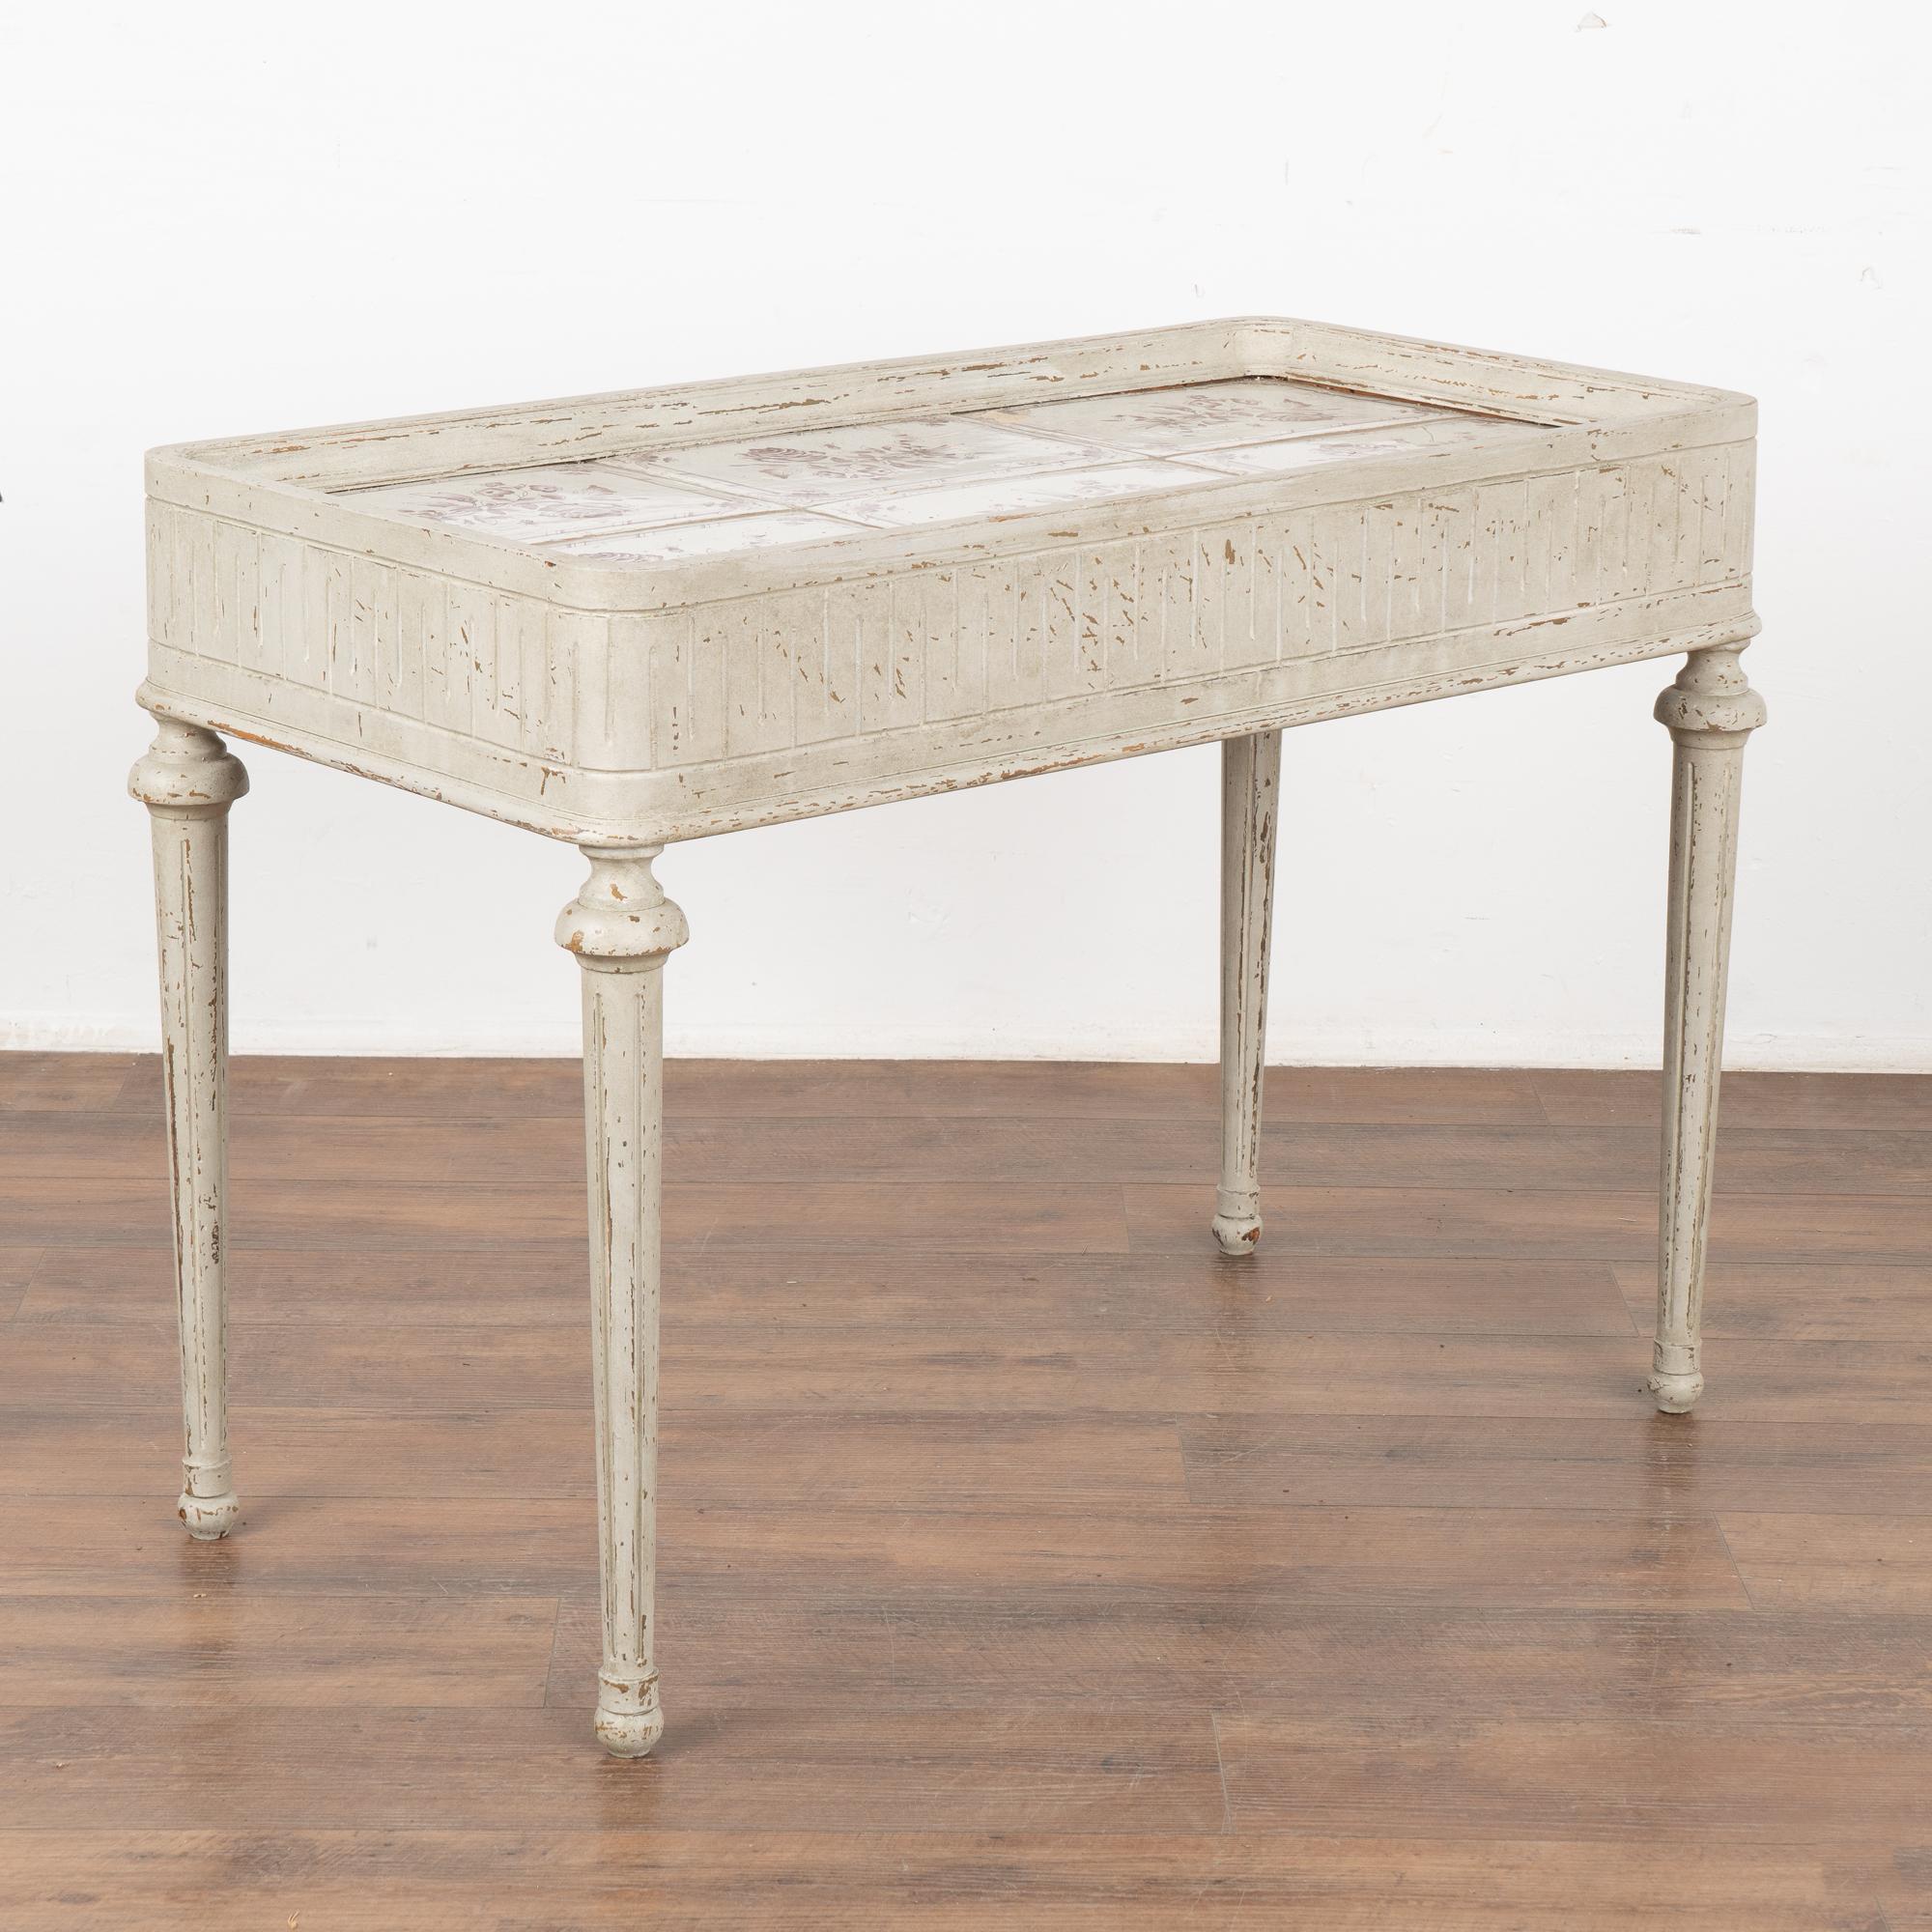 Swedish Gustavian tile top side table with tapered fluted legs and raised lip around tile top. Fluted carved details surround the 6.5